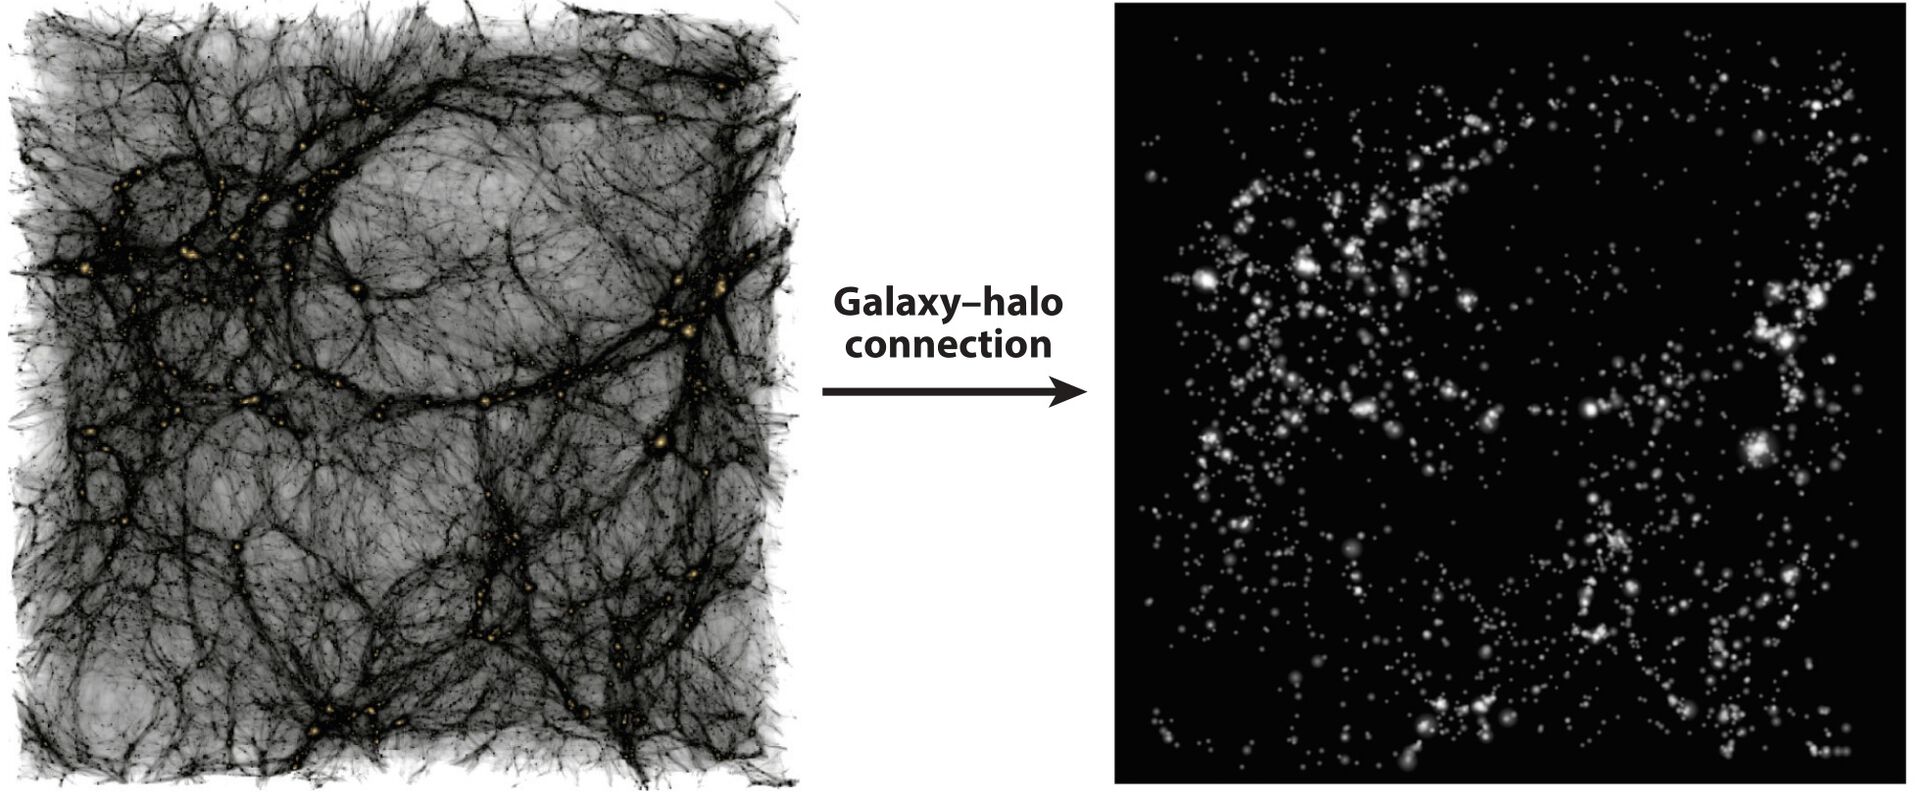 image composition of a simulation of the cosmic web